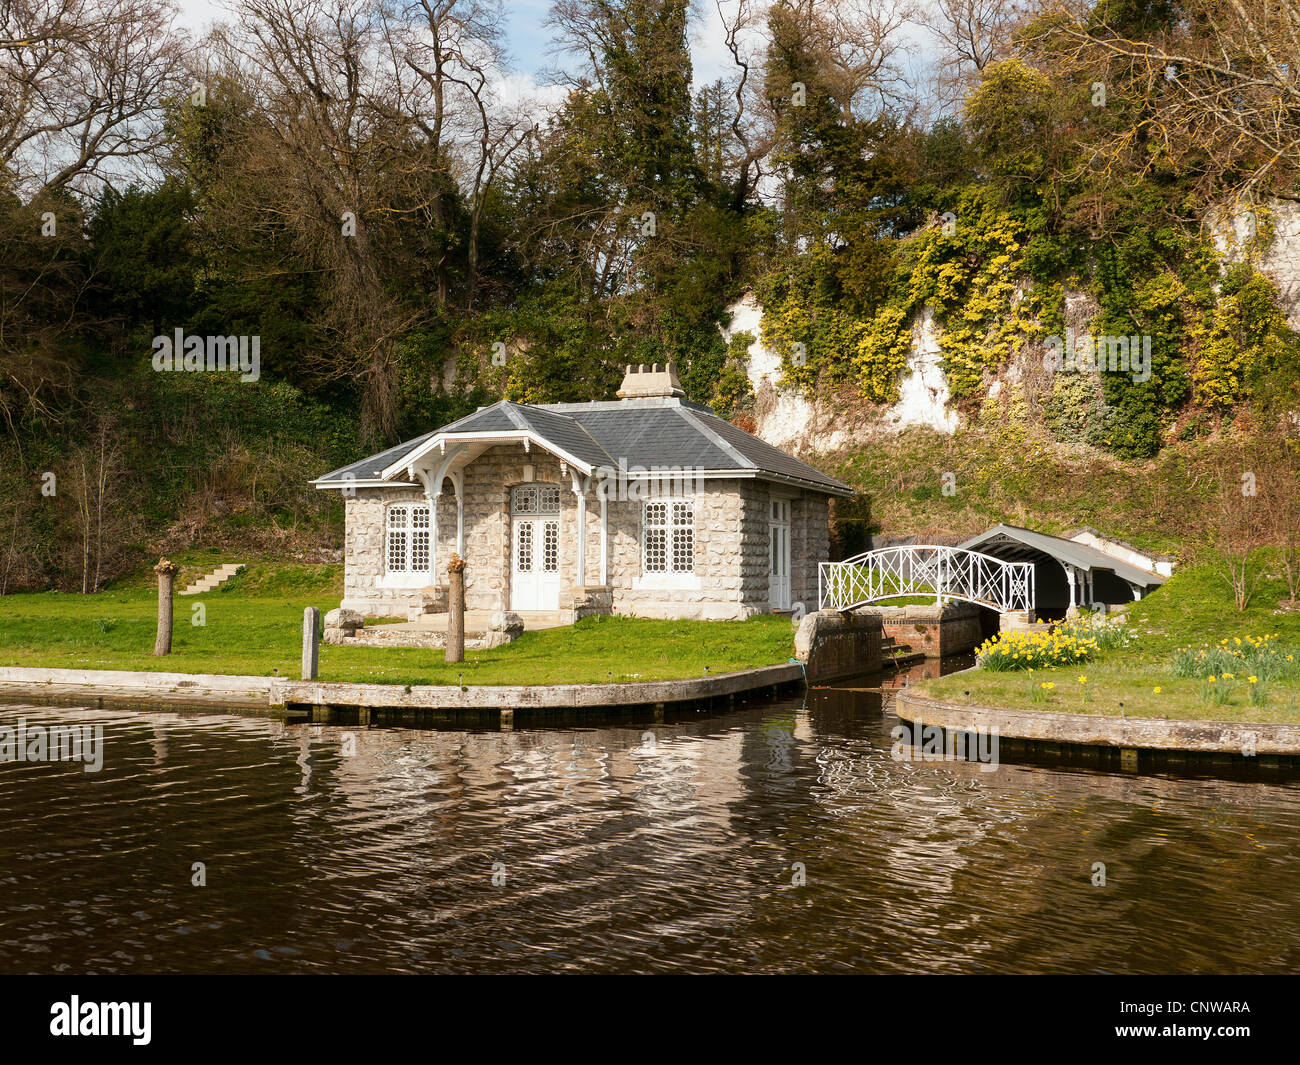 Picturesque stone riverside house and boat house,on the River Thames, Oxfordshire, UK Stock Photo